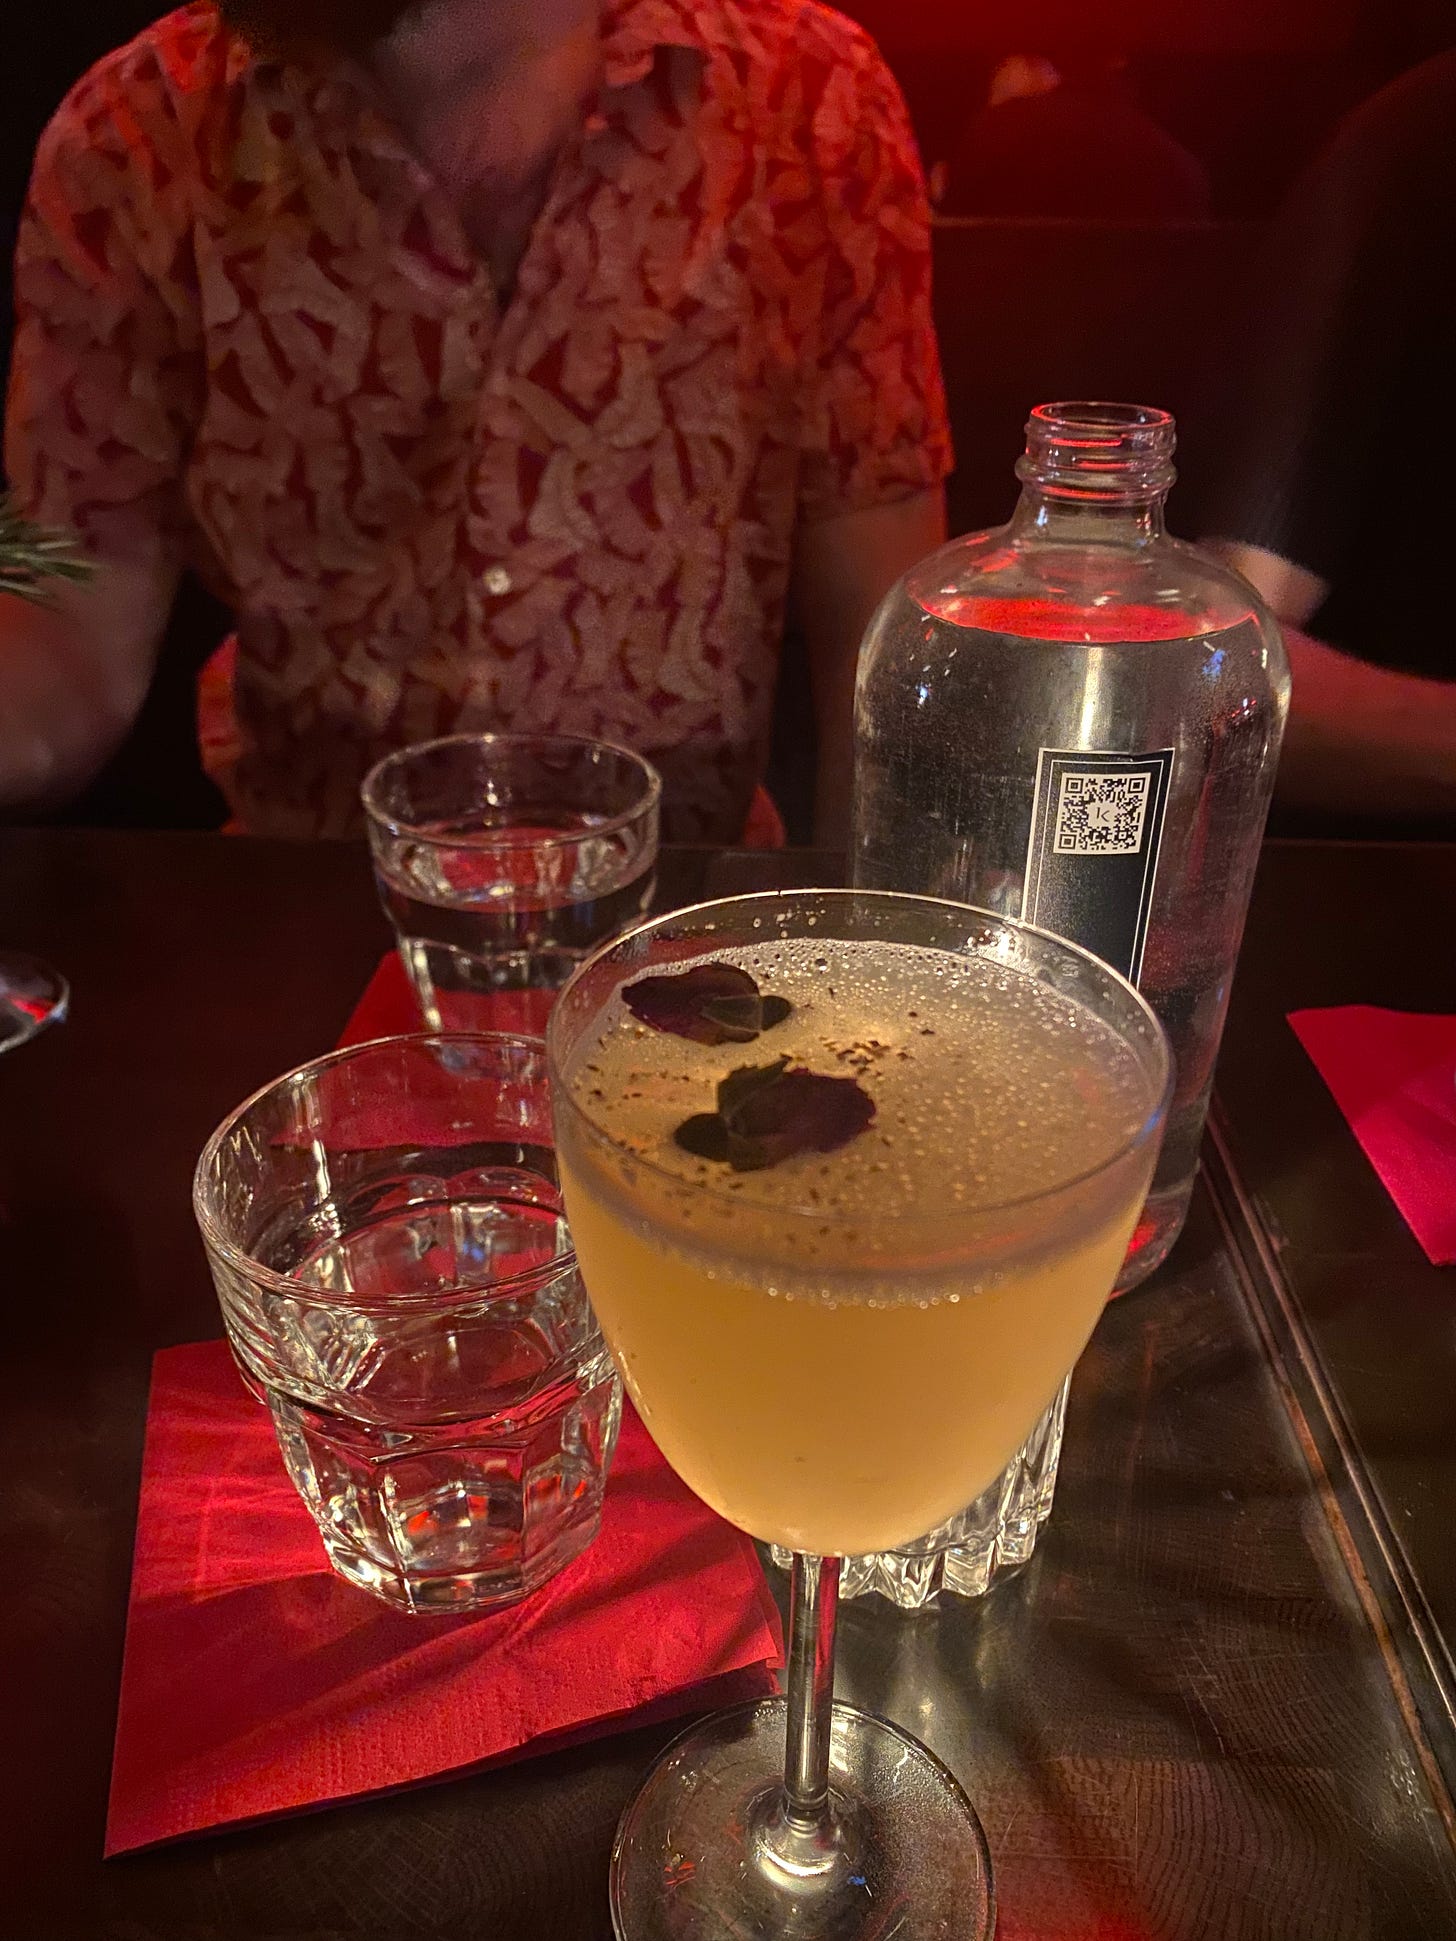 my Skeleton's Kiss cocktail, with two dried rosebuds and crushed chili floating on top. Jeff, wearing a red and white patterned shirt, is visible across the table.